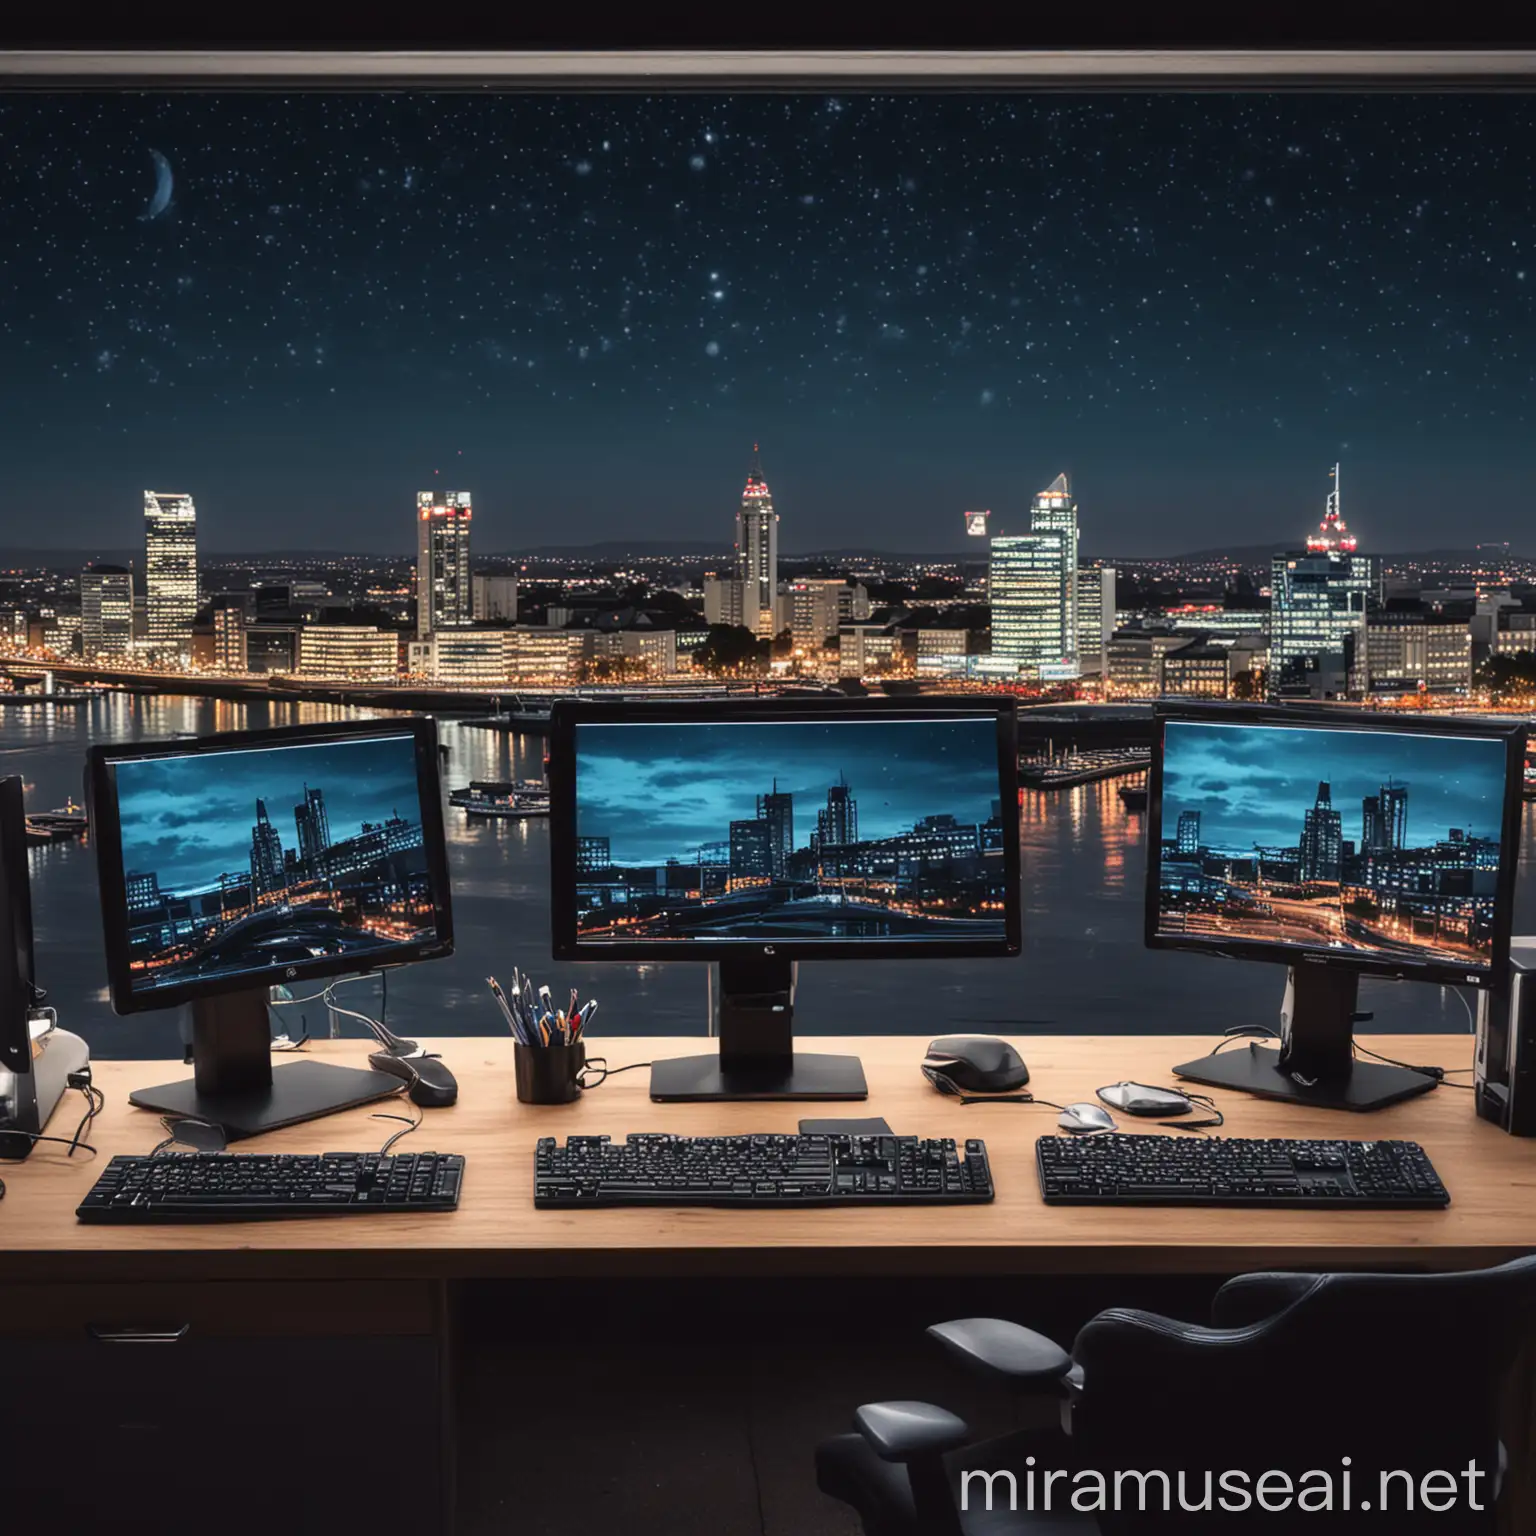 Professional News Studio with Computers and Night City View